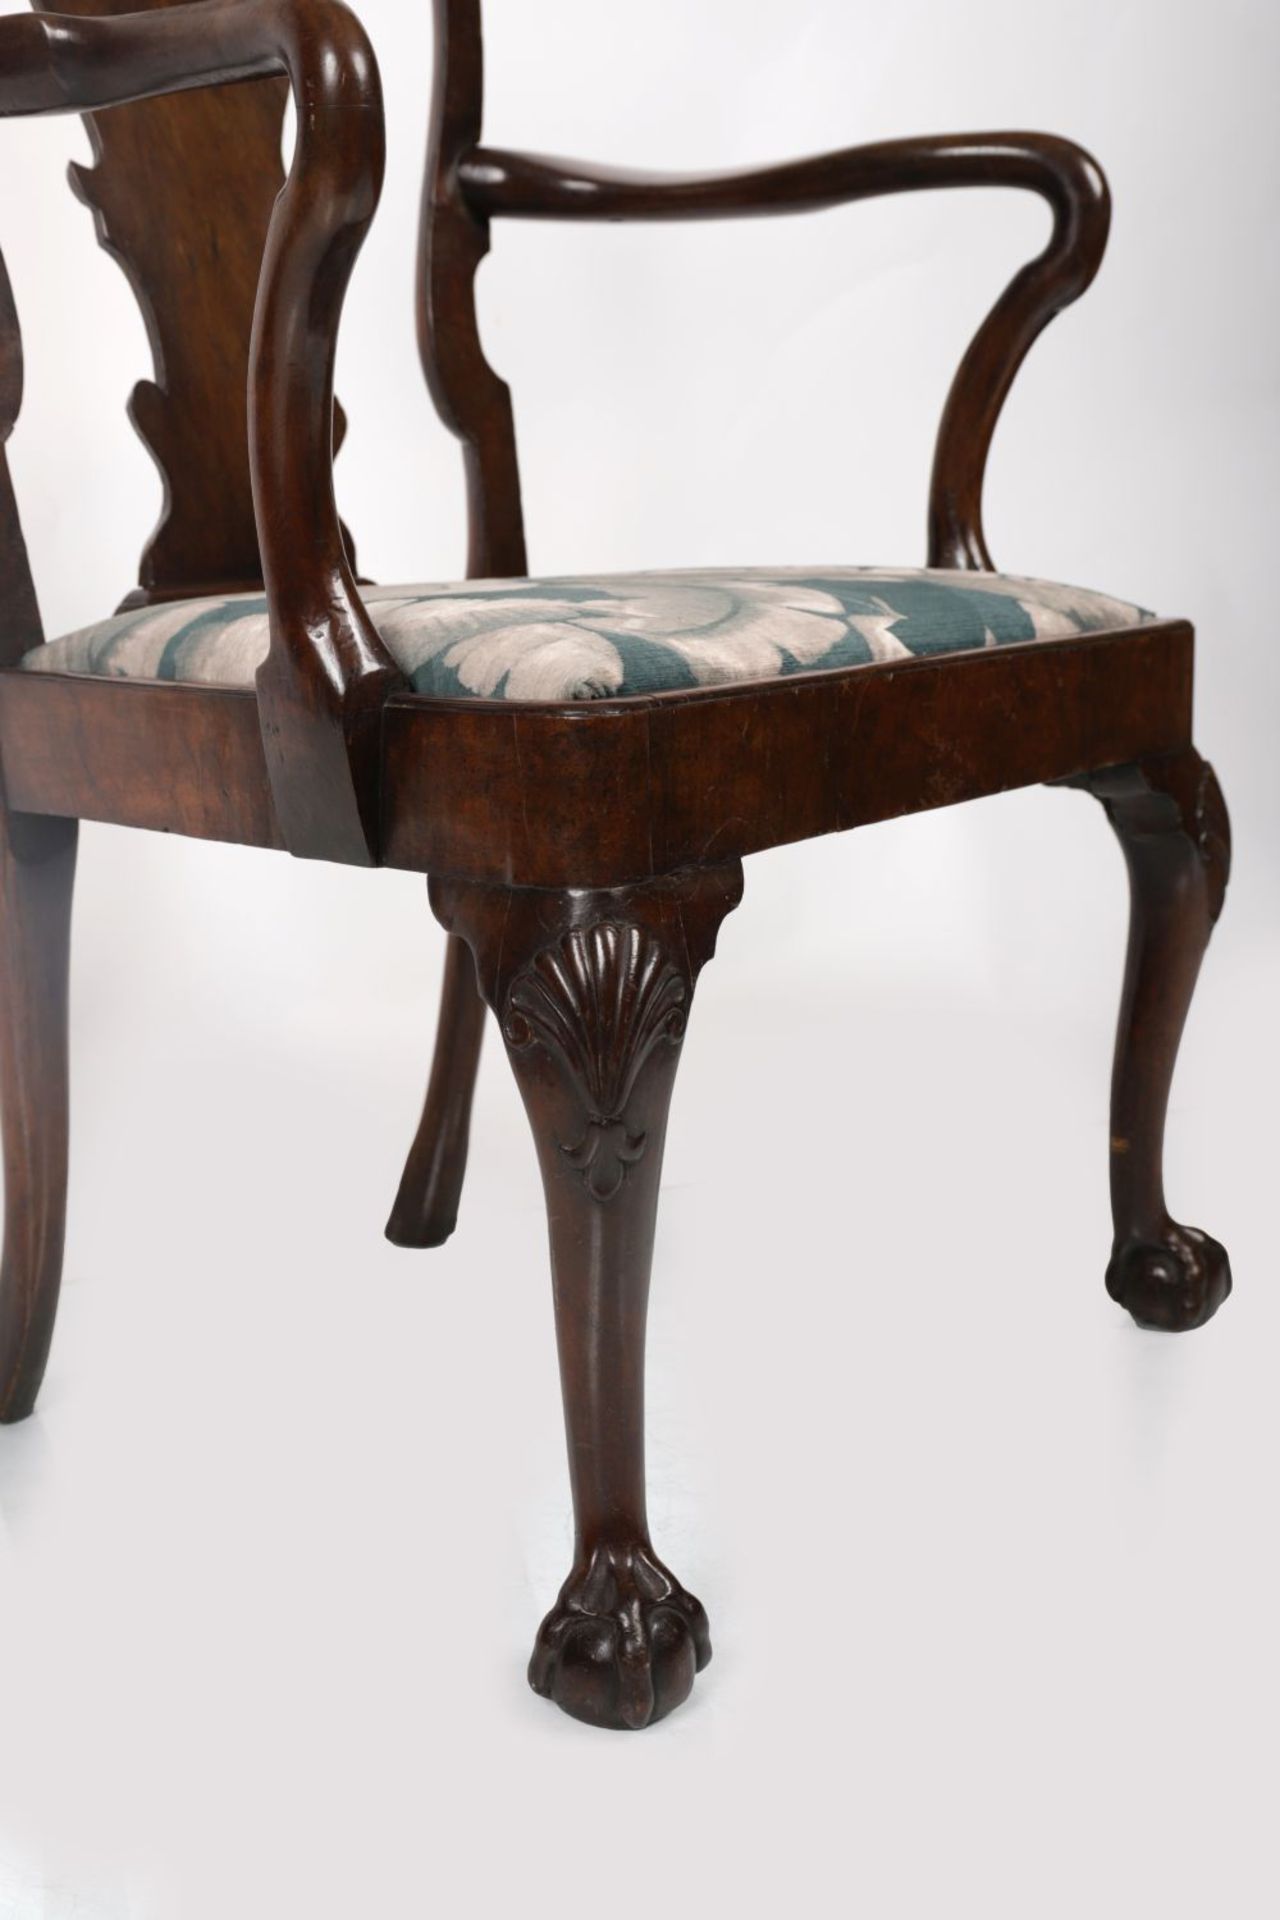 GEORGE I WALNUT ELBOW CHAIR - Image 3 of 3